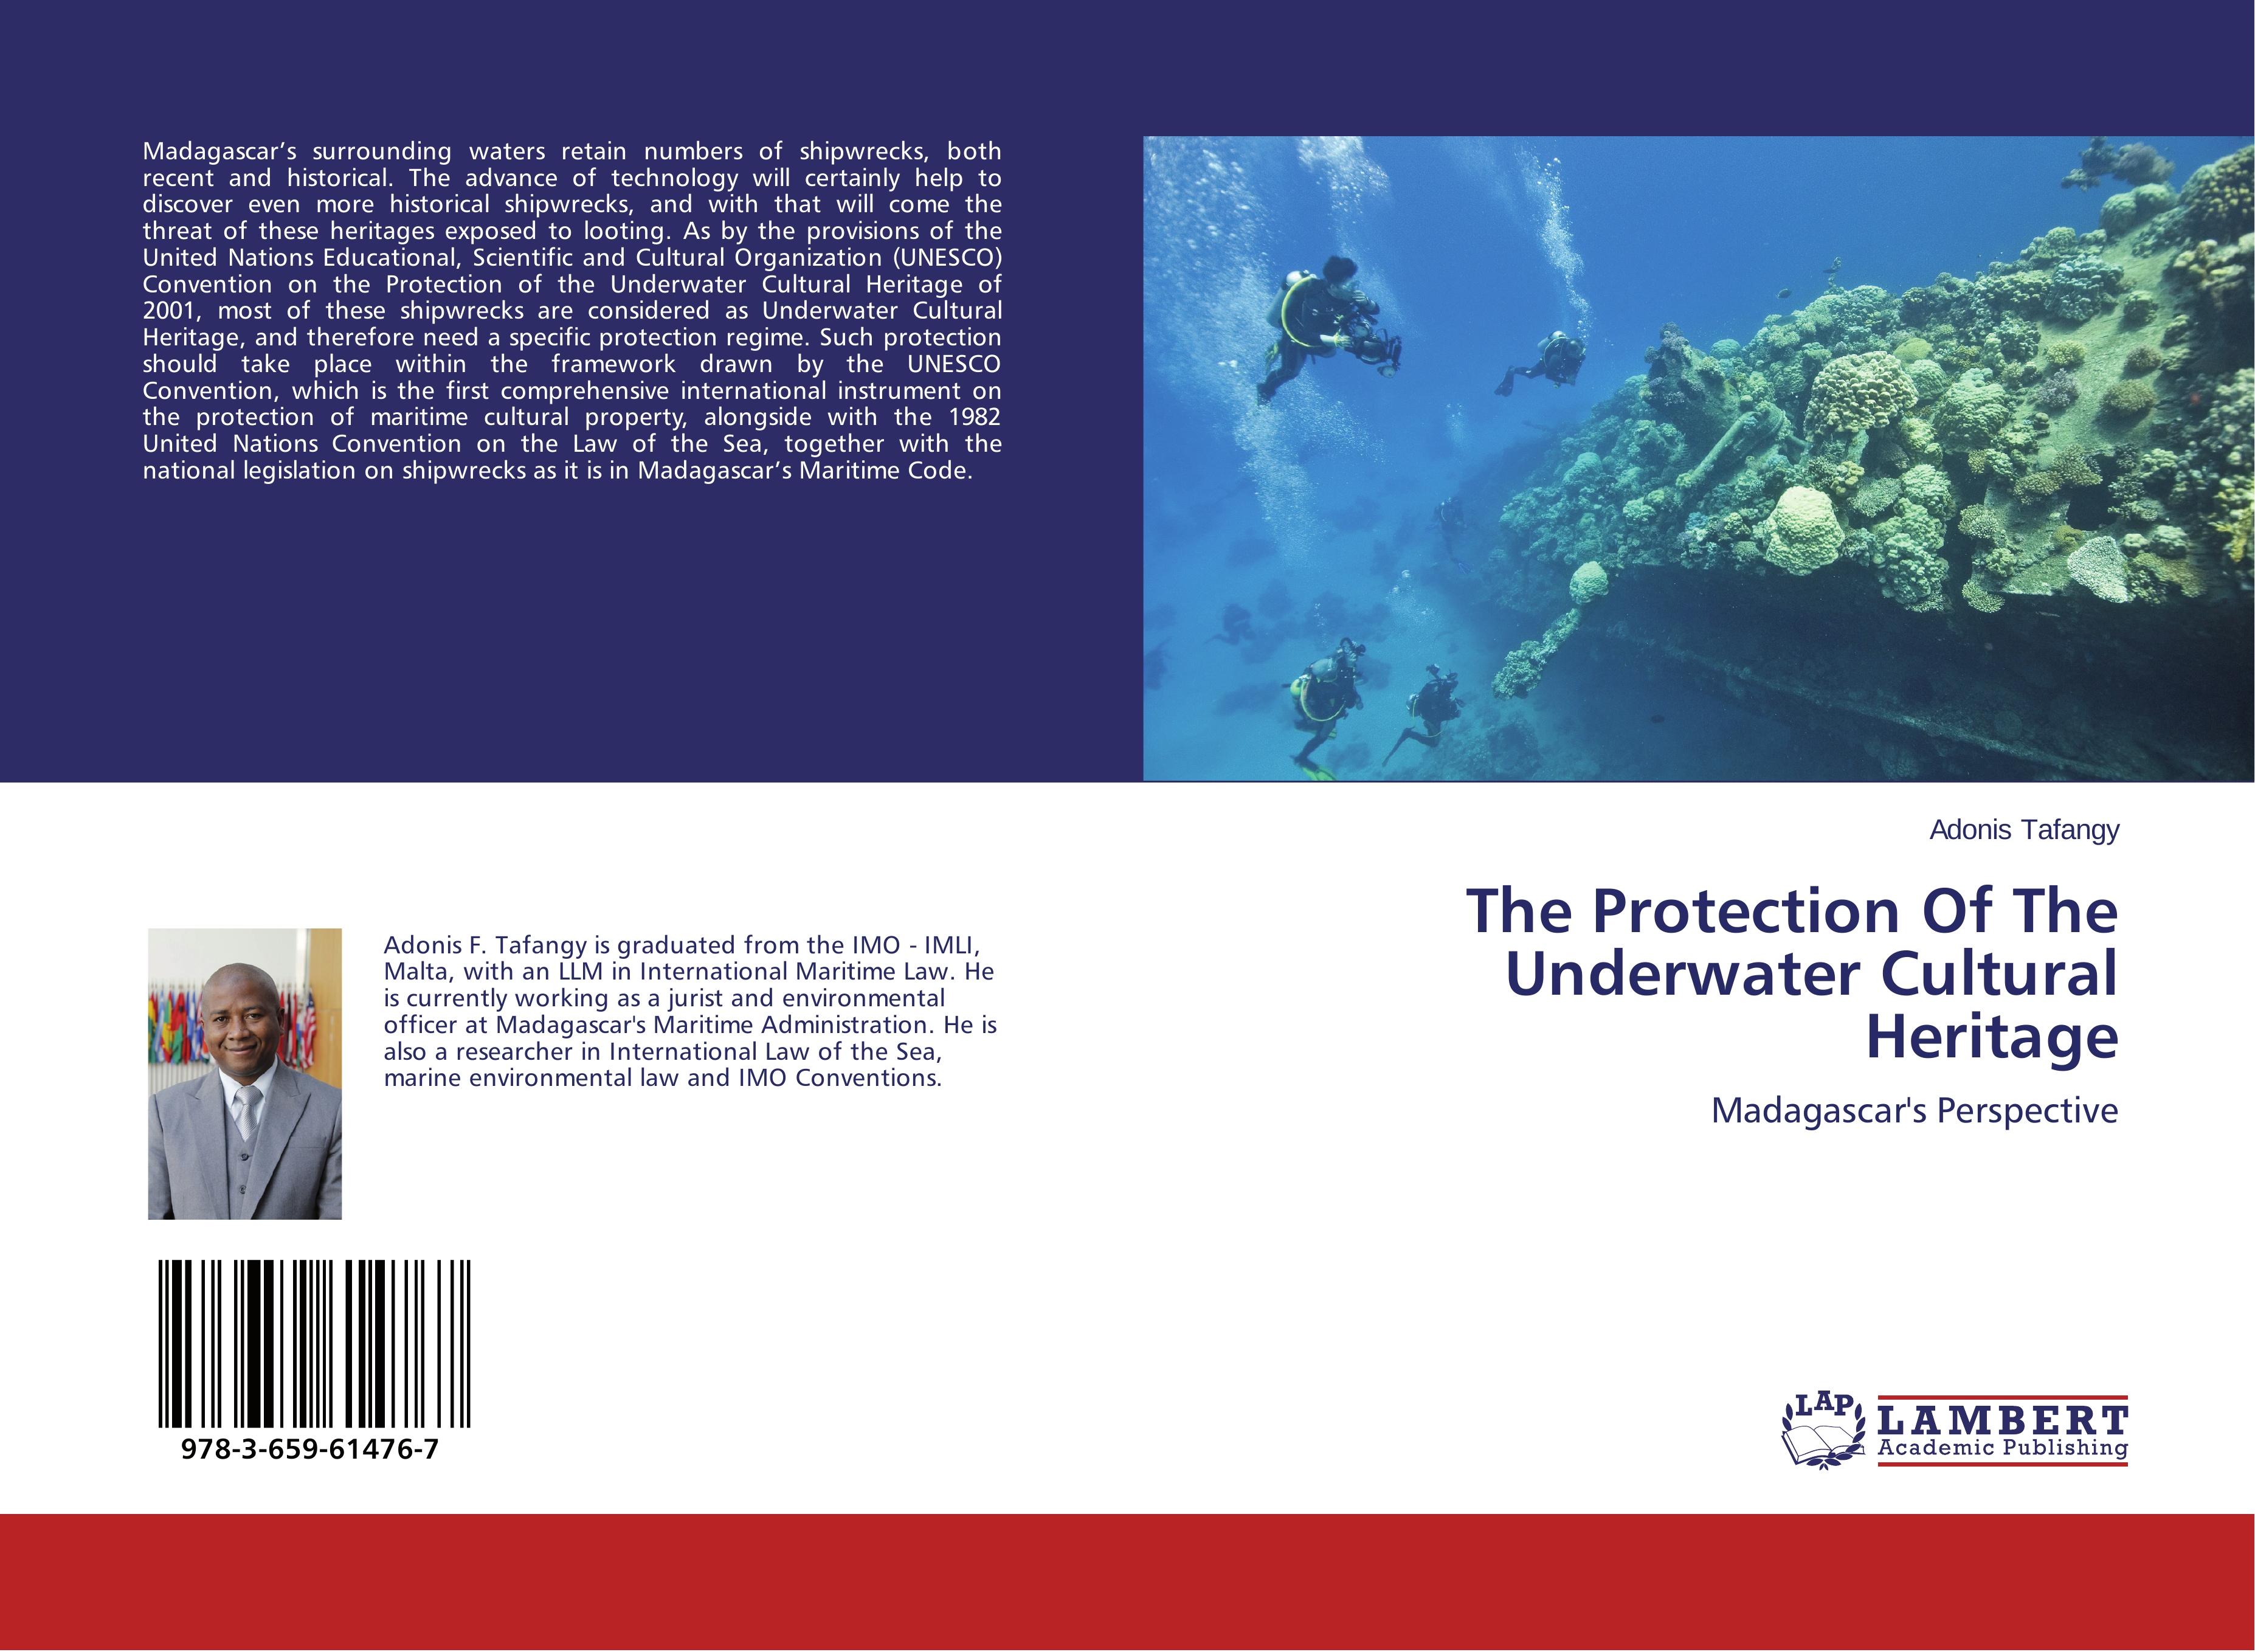 The Protection Of The Underwater Cultural Heritage / Madagascar's Perspective / Adonis Tafangy / Taschenbuch / Paperback / 68 S. / Englisch / 2014 / LAP LAMBERT Academic Publishing / EAN 9783659614767 - Tafangy, Adonis